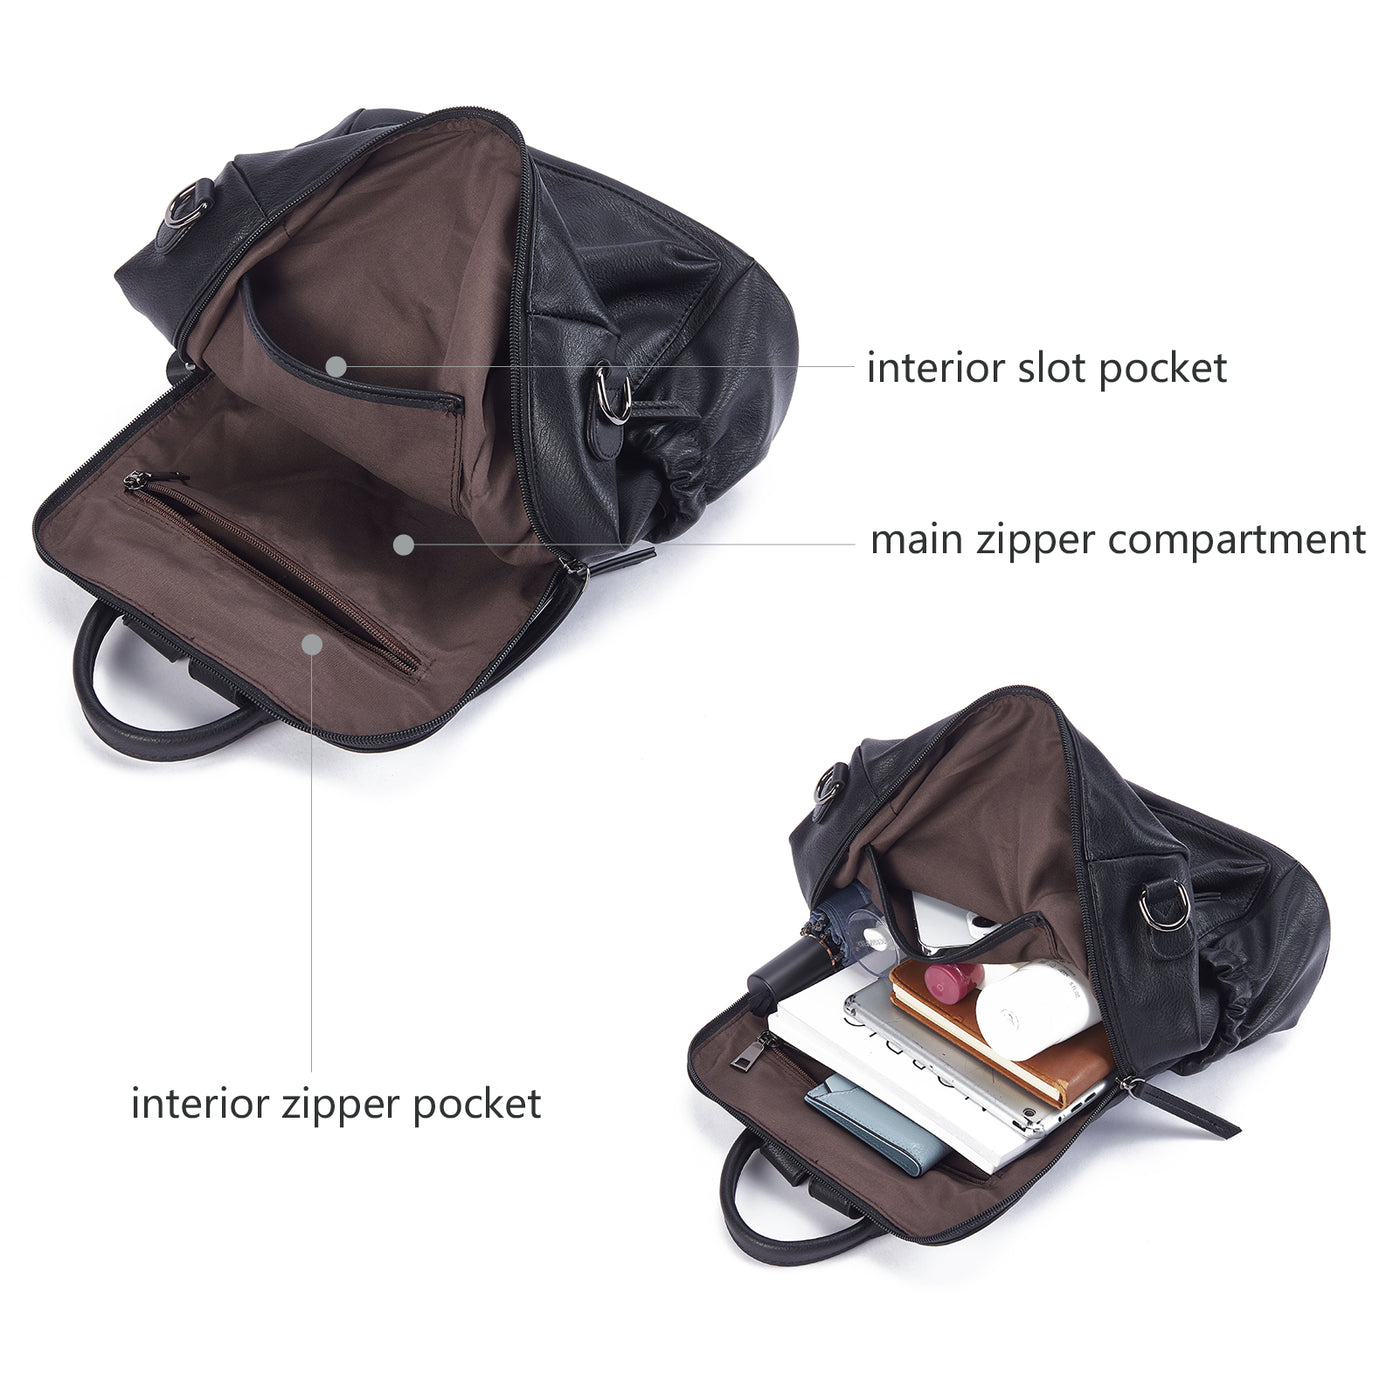 Minoru The Ultimate Convertible Travel Backpack for Every Adventure